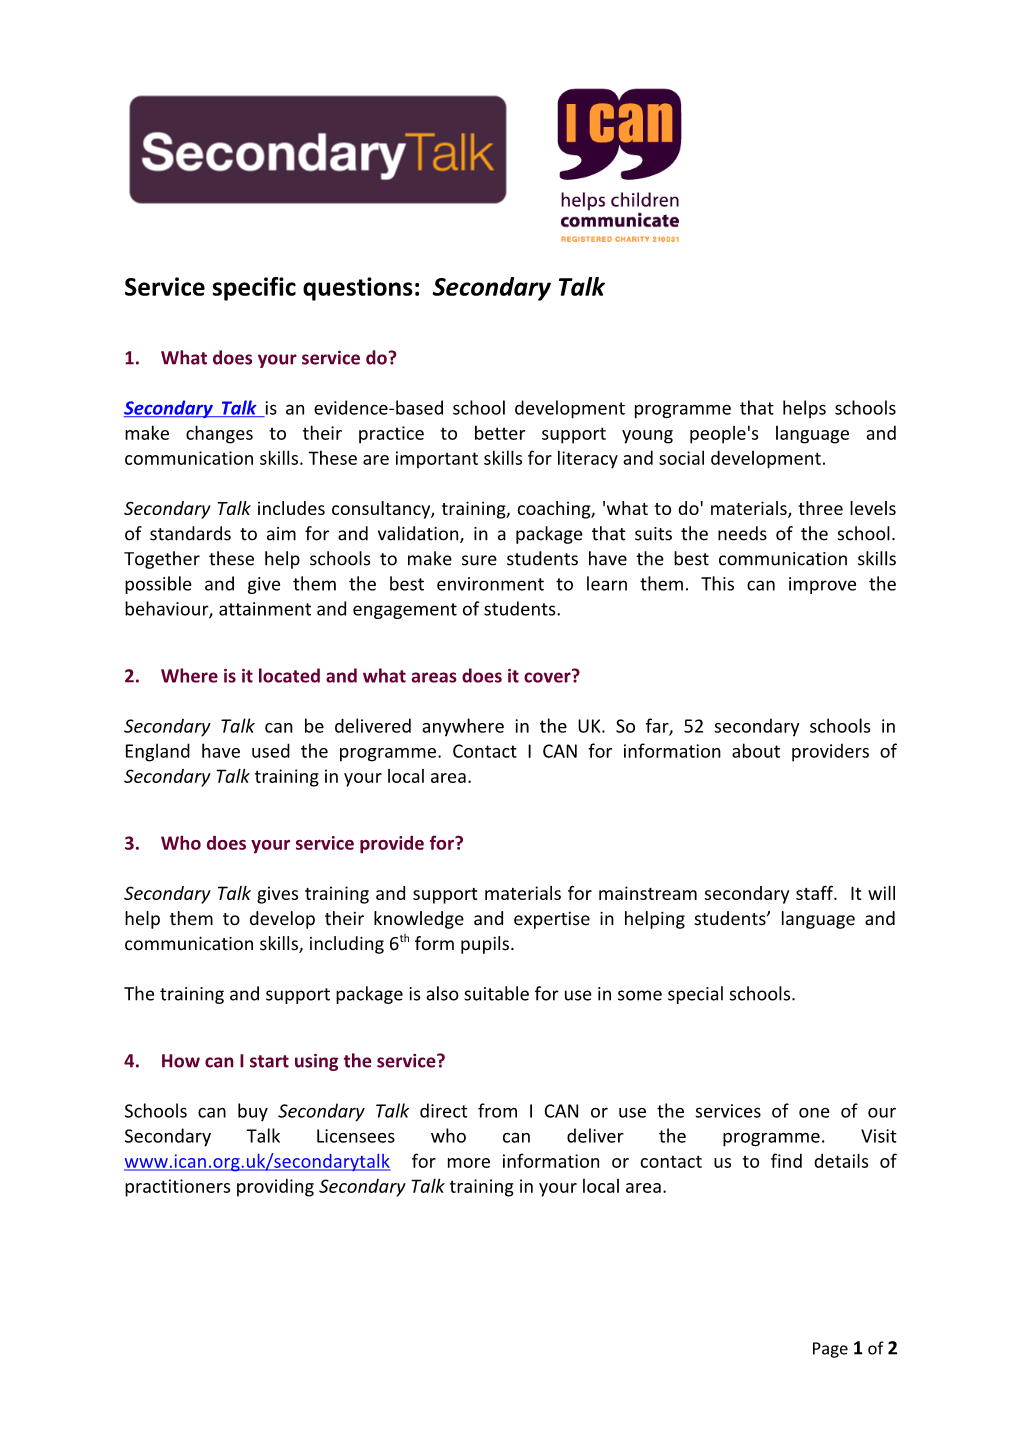 Service Specific Questions:Secondary Talk